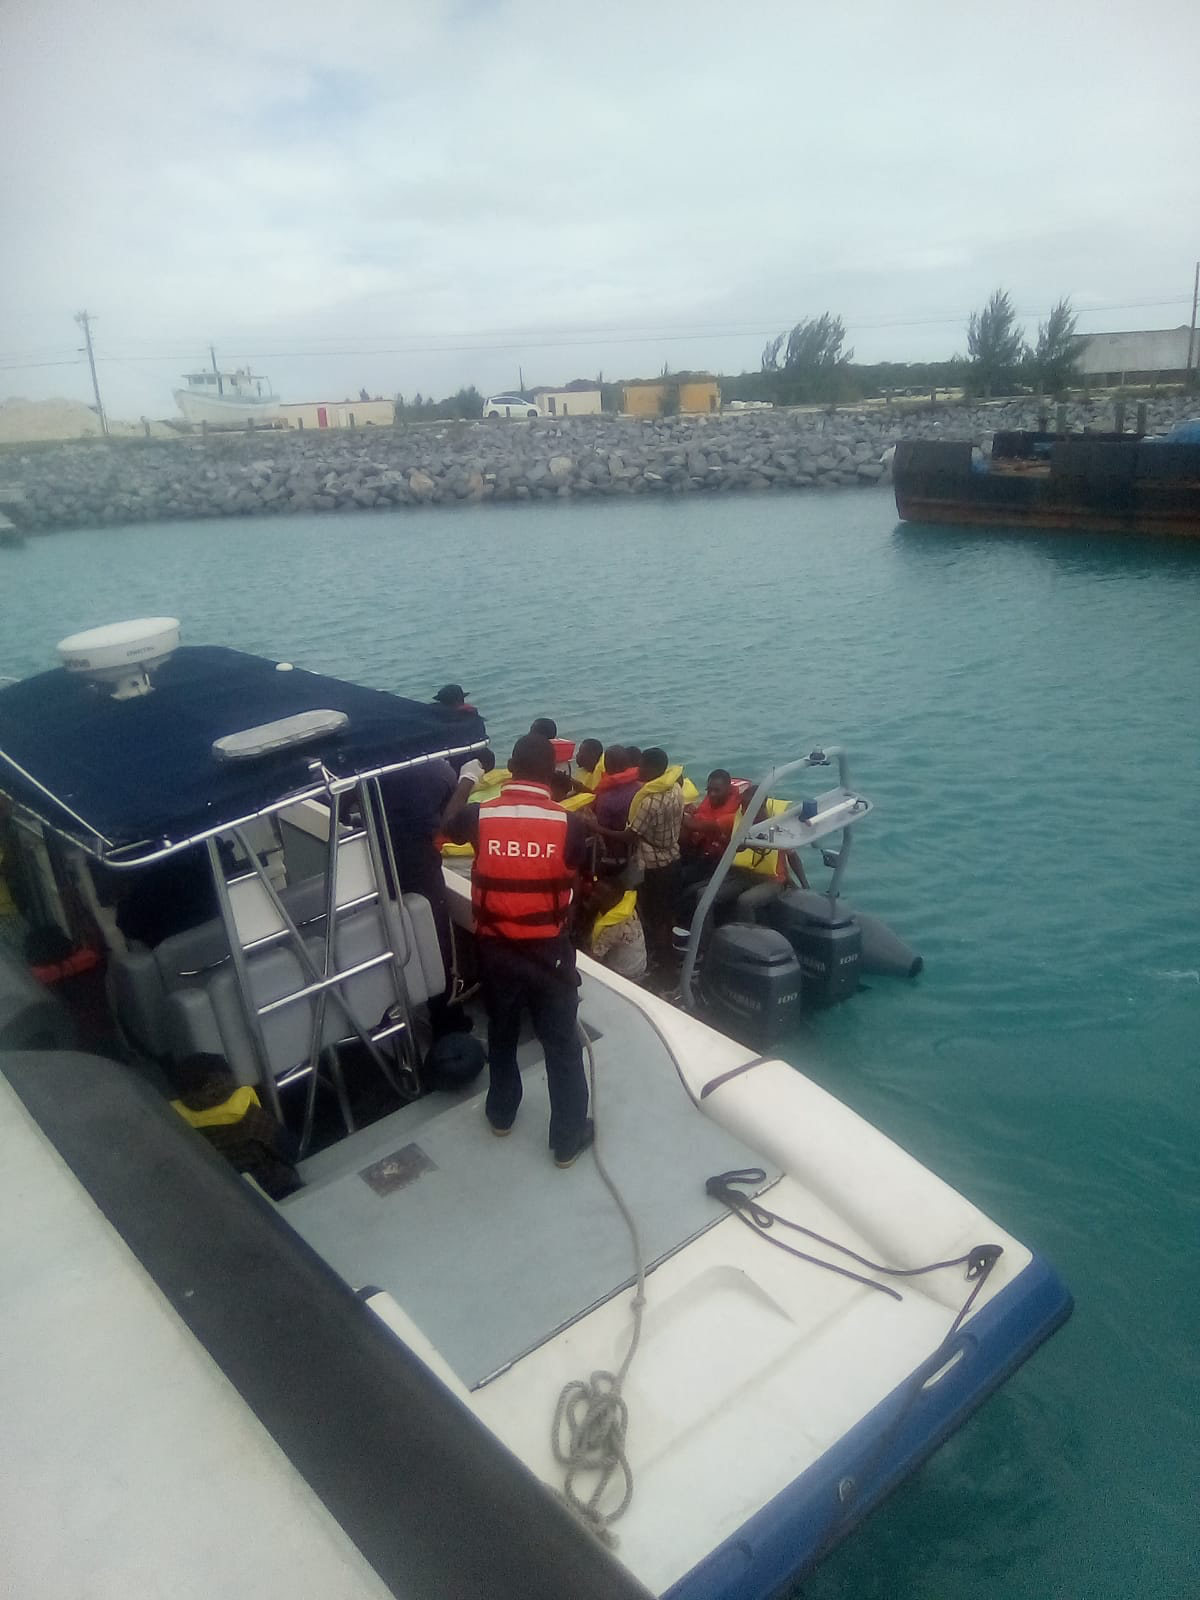 Coast Guard, partner agencies rescue 185 people 17 miles southwest of Turks and Caicos Islands